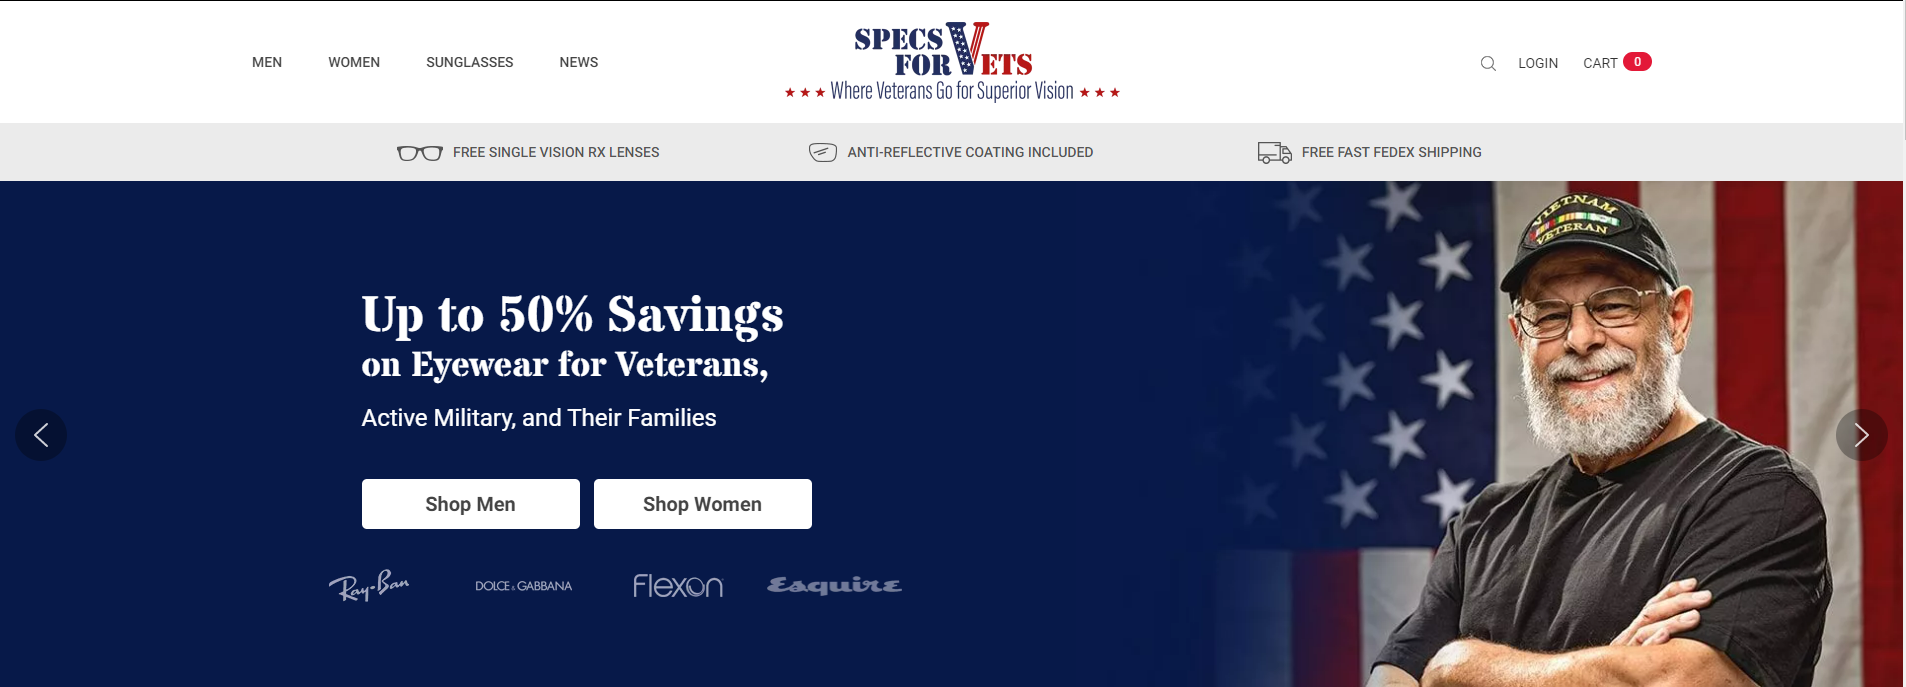 Specs for Vets website banner. A man in the right corner smiling with an american flag as his background. On the left side of the image a 50% savings offer on eyewear for veterans.